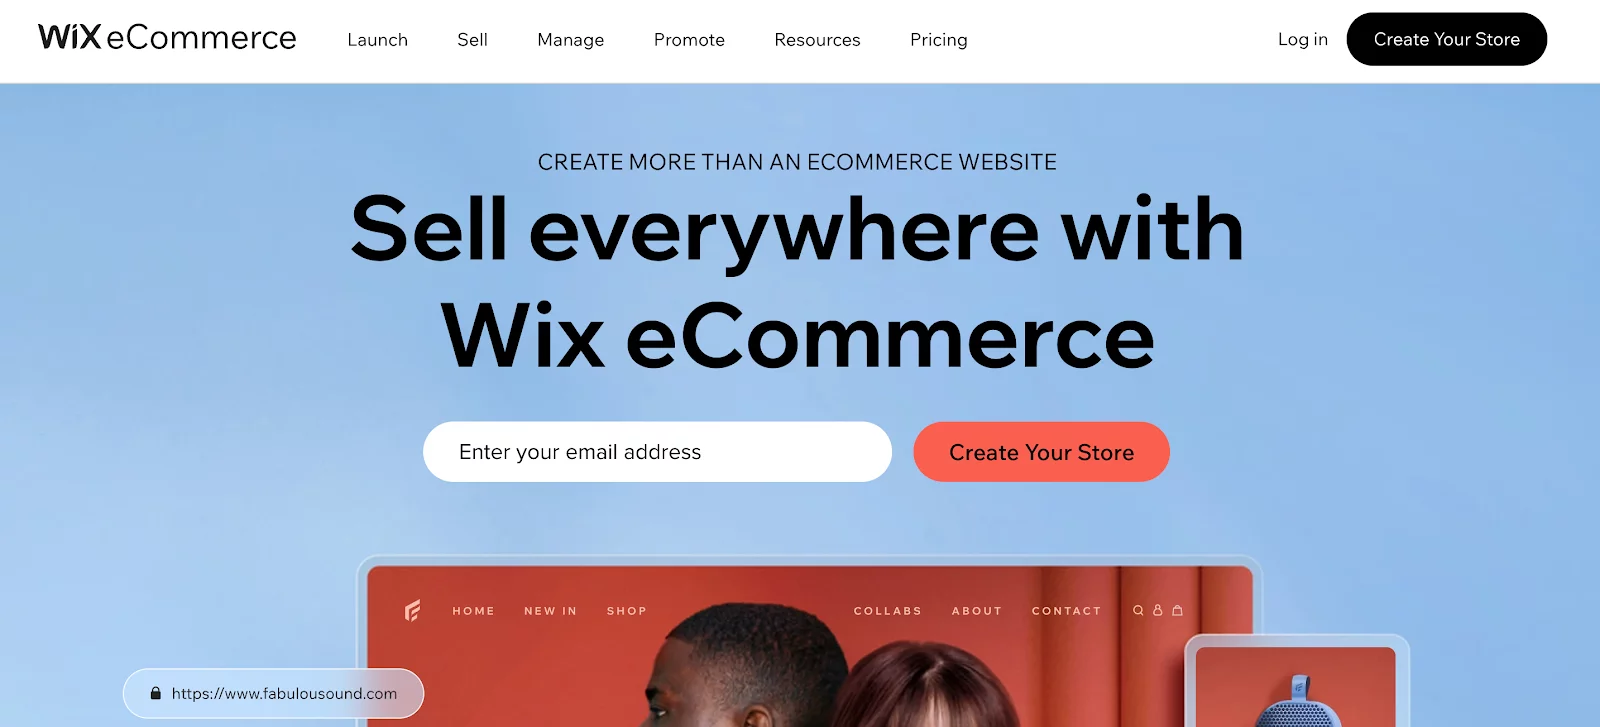 Wix vs Shopify - WixeCommerce